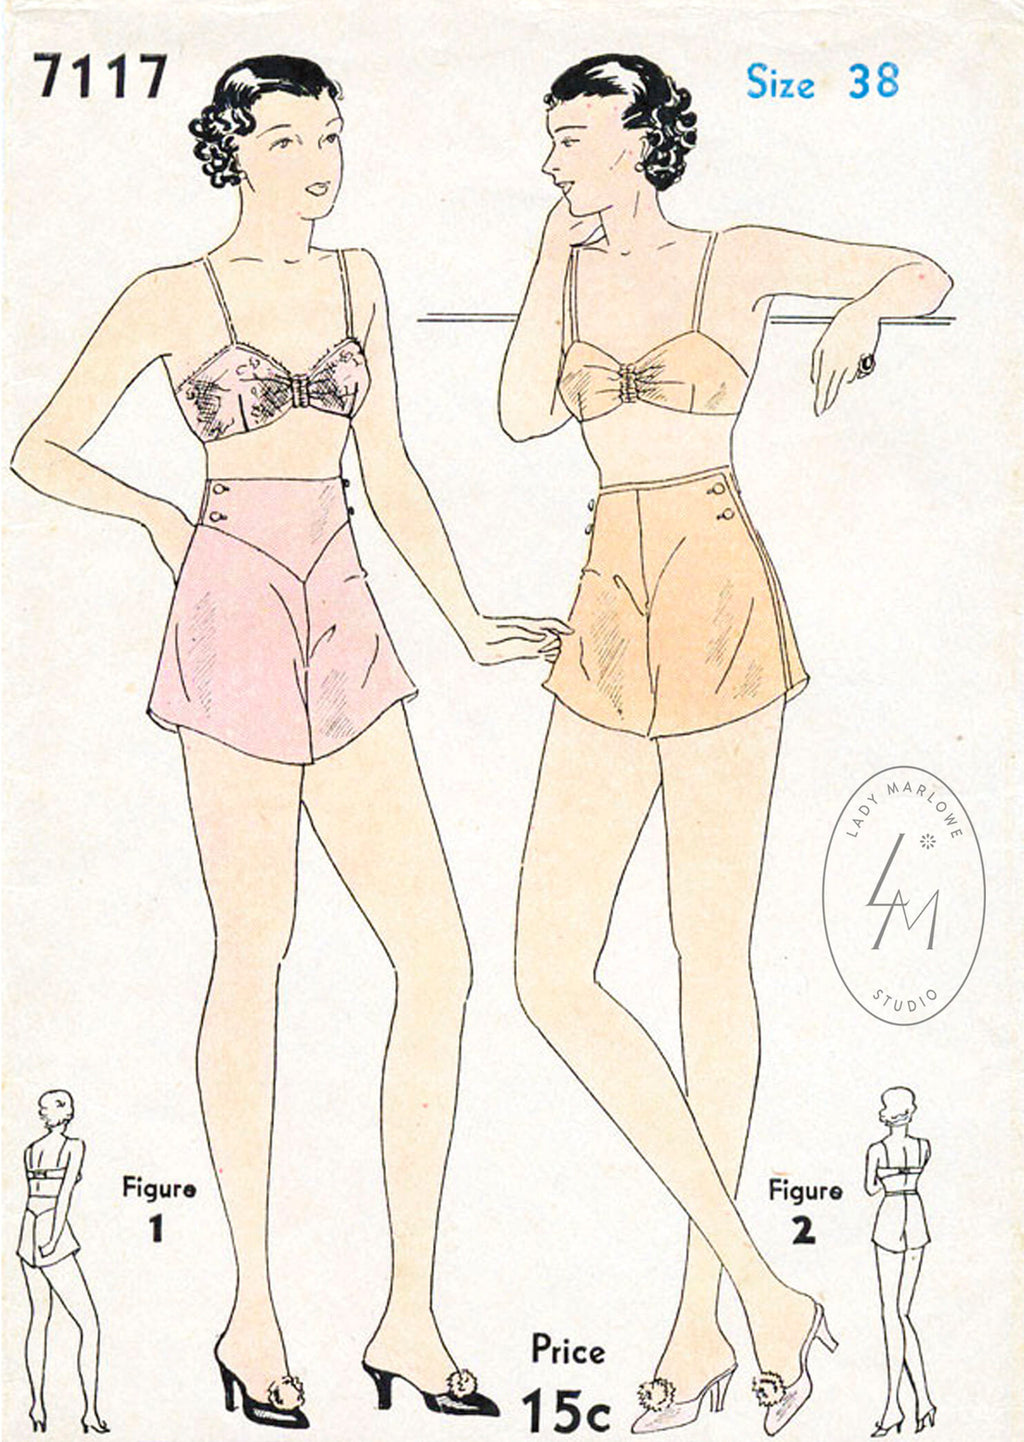 The Sewing Room Vintage Style Sewing and Fashion Blog - 1920's Lingerie